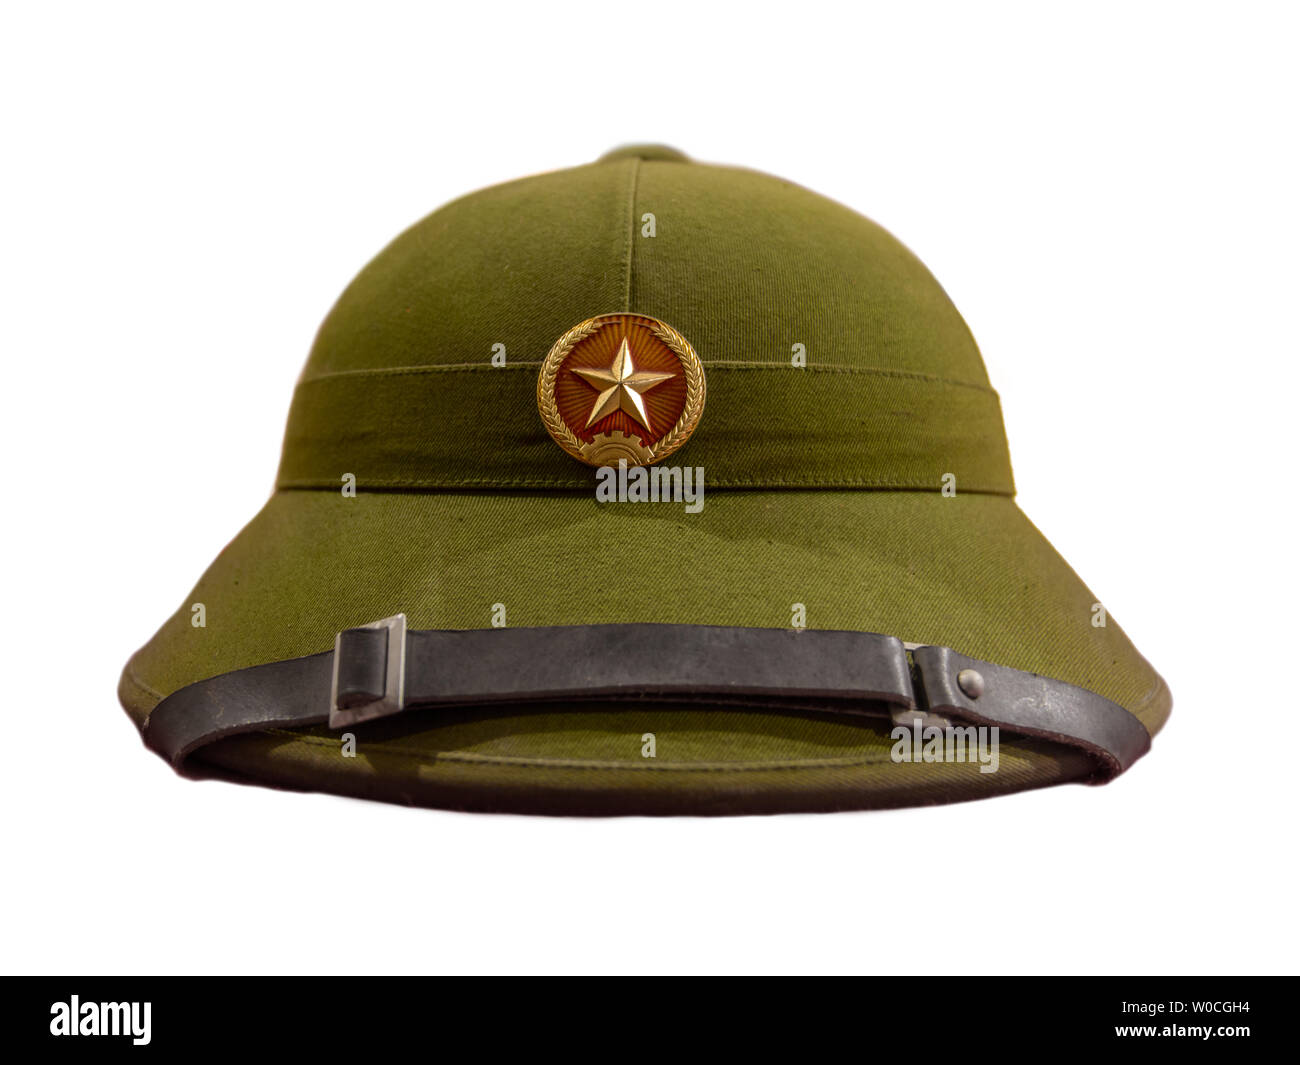 Old military helmet from Vietnam, isolated on white background. Stock Photo